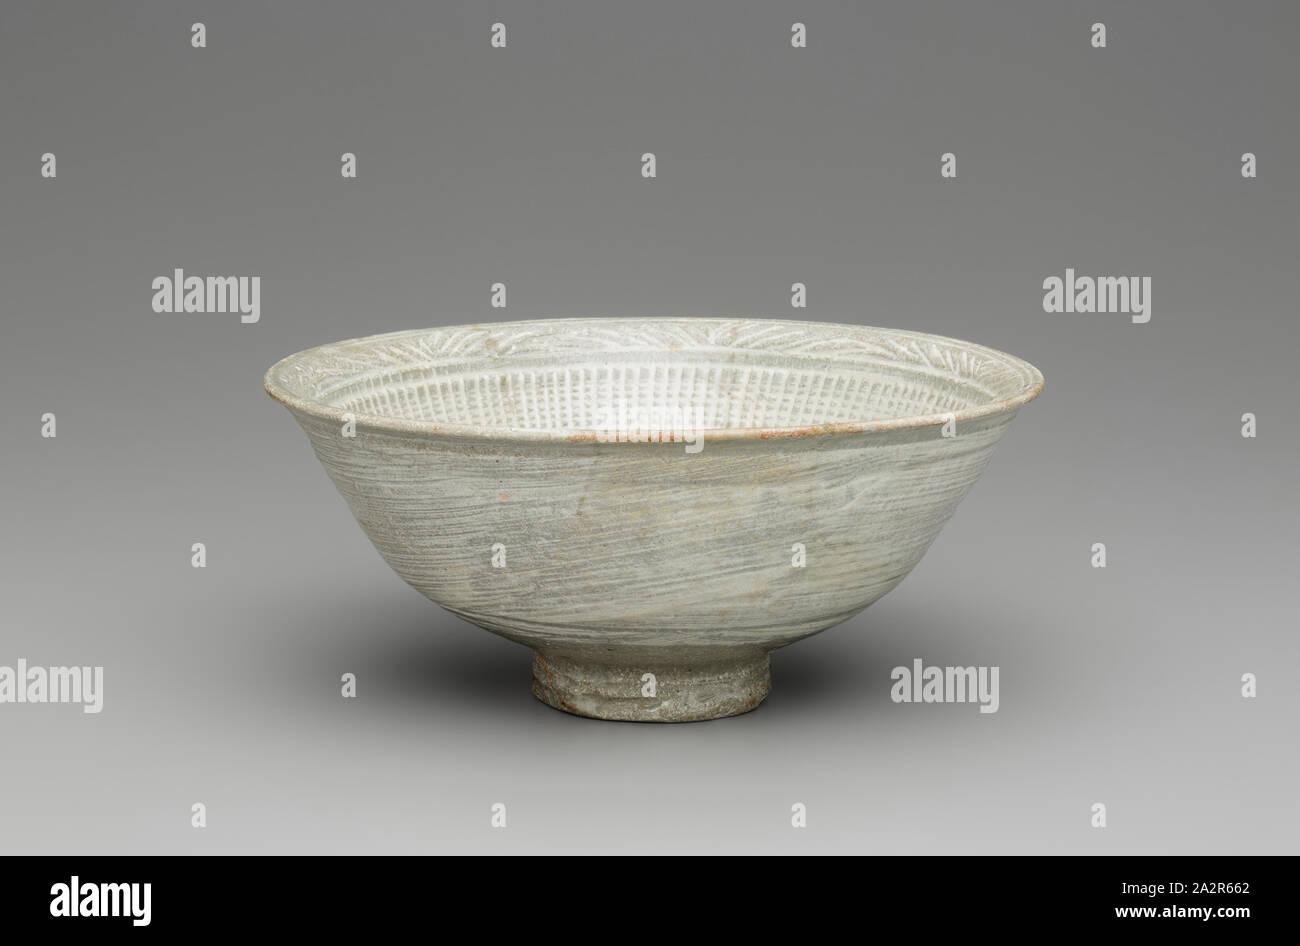 Unknown (Korean), Deep Bowl with Chrysanthemum Decoration, 15th/16th Century, Stoneware with white slip decoration and light green glaze, Overall: 3 1/4 × 7 3/8 inches (8.3 × 18.7 cm Stock Photo